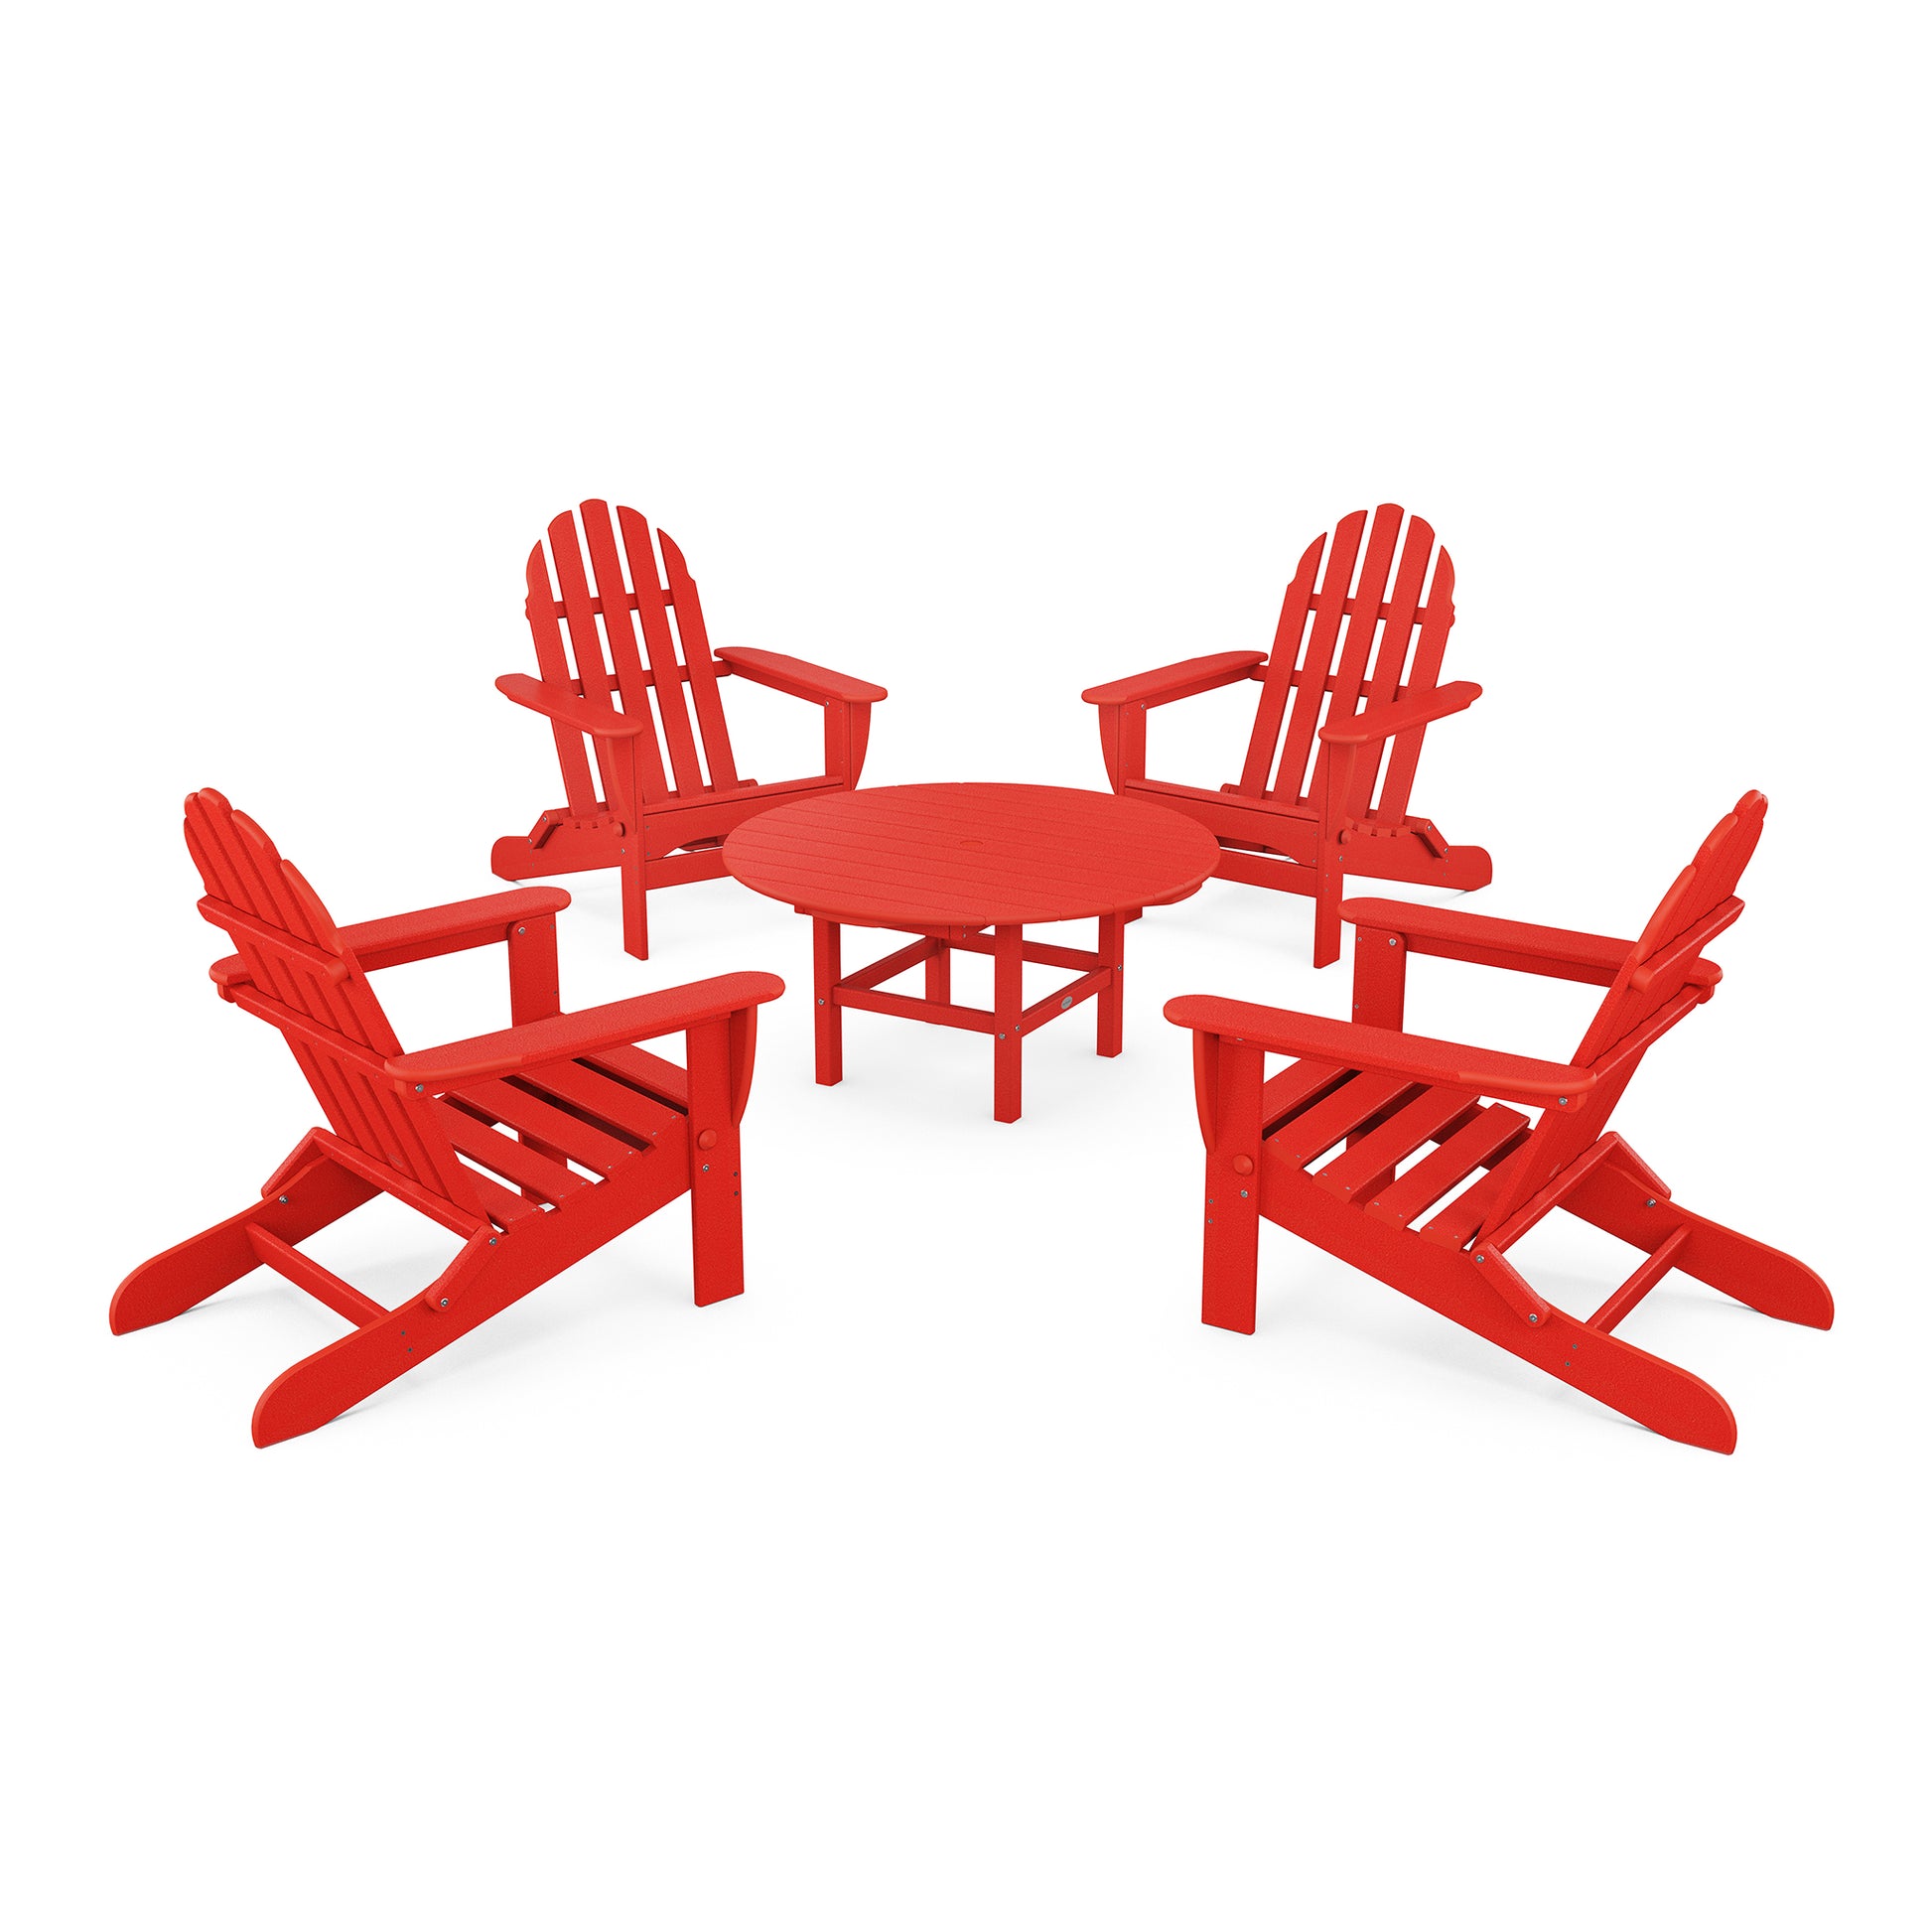 Four red POLYWOOD Classic Folding Adirondack chairs arranged around a matching red circular table, set on a white background. The chairs are styled with wide back slats and armrests, suggesting.